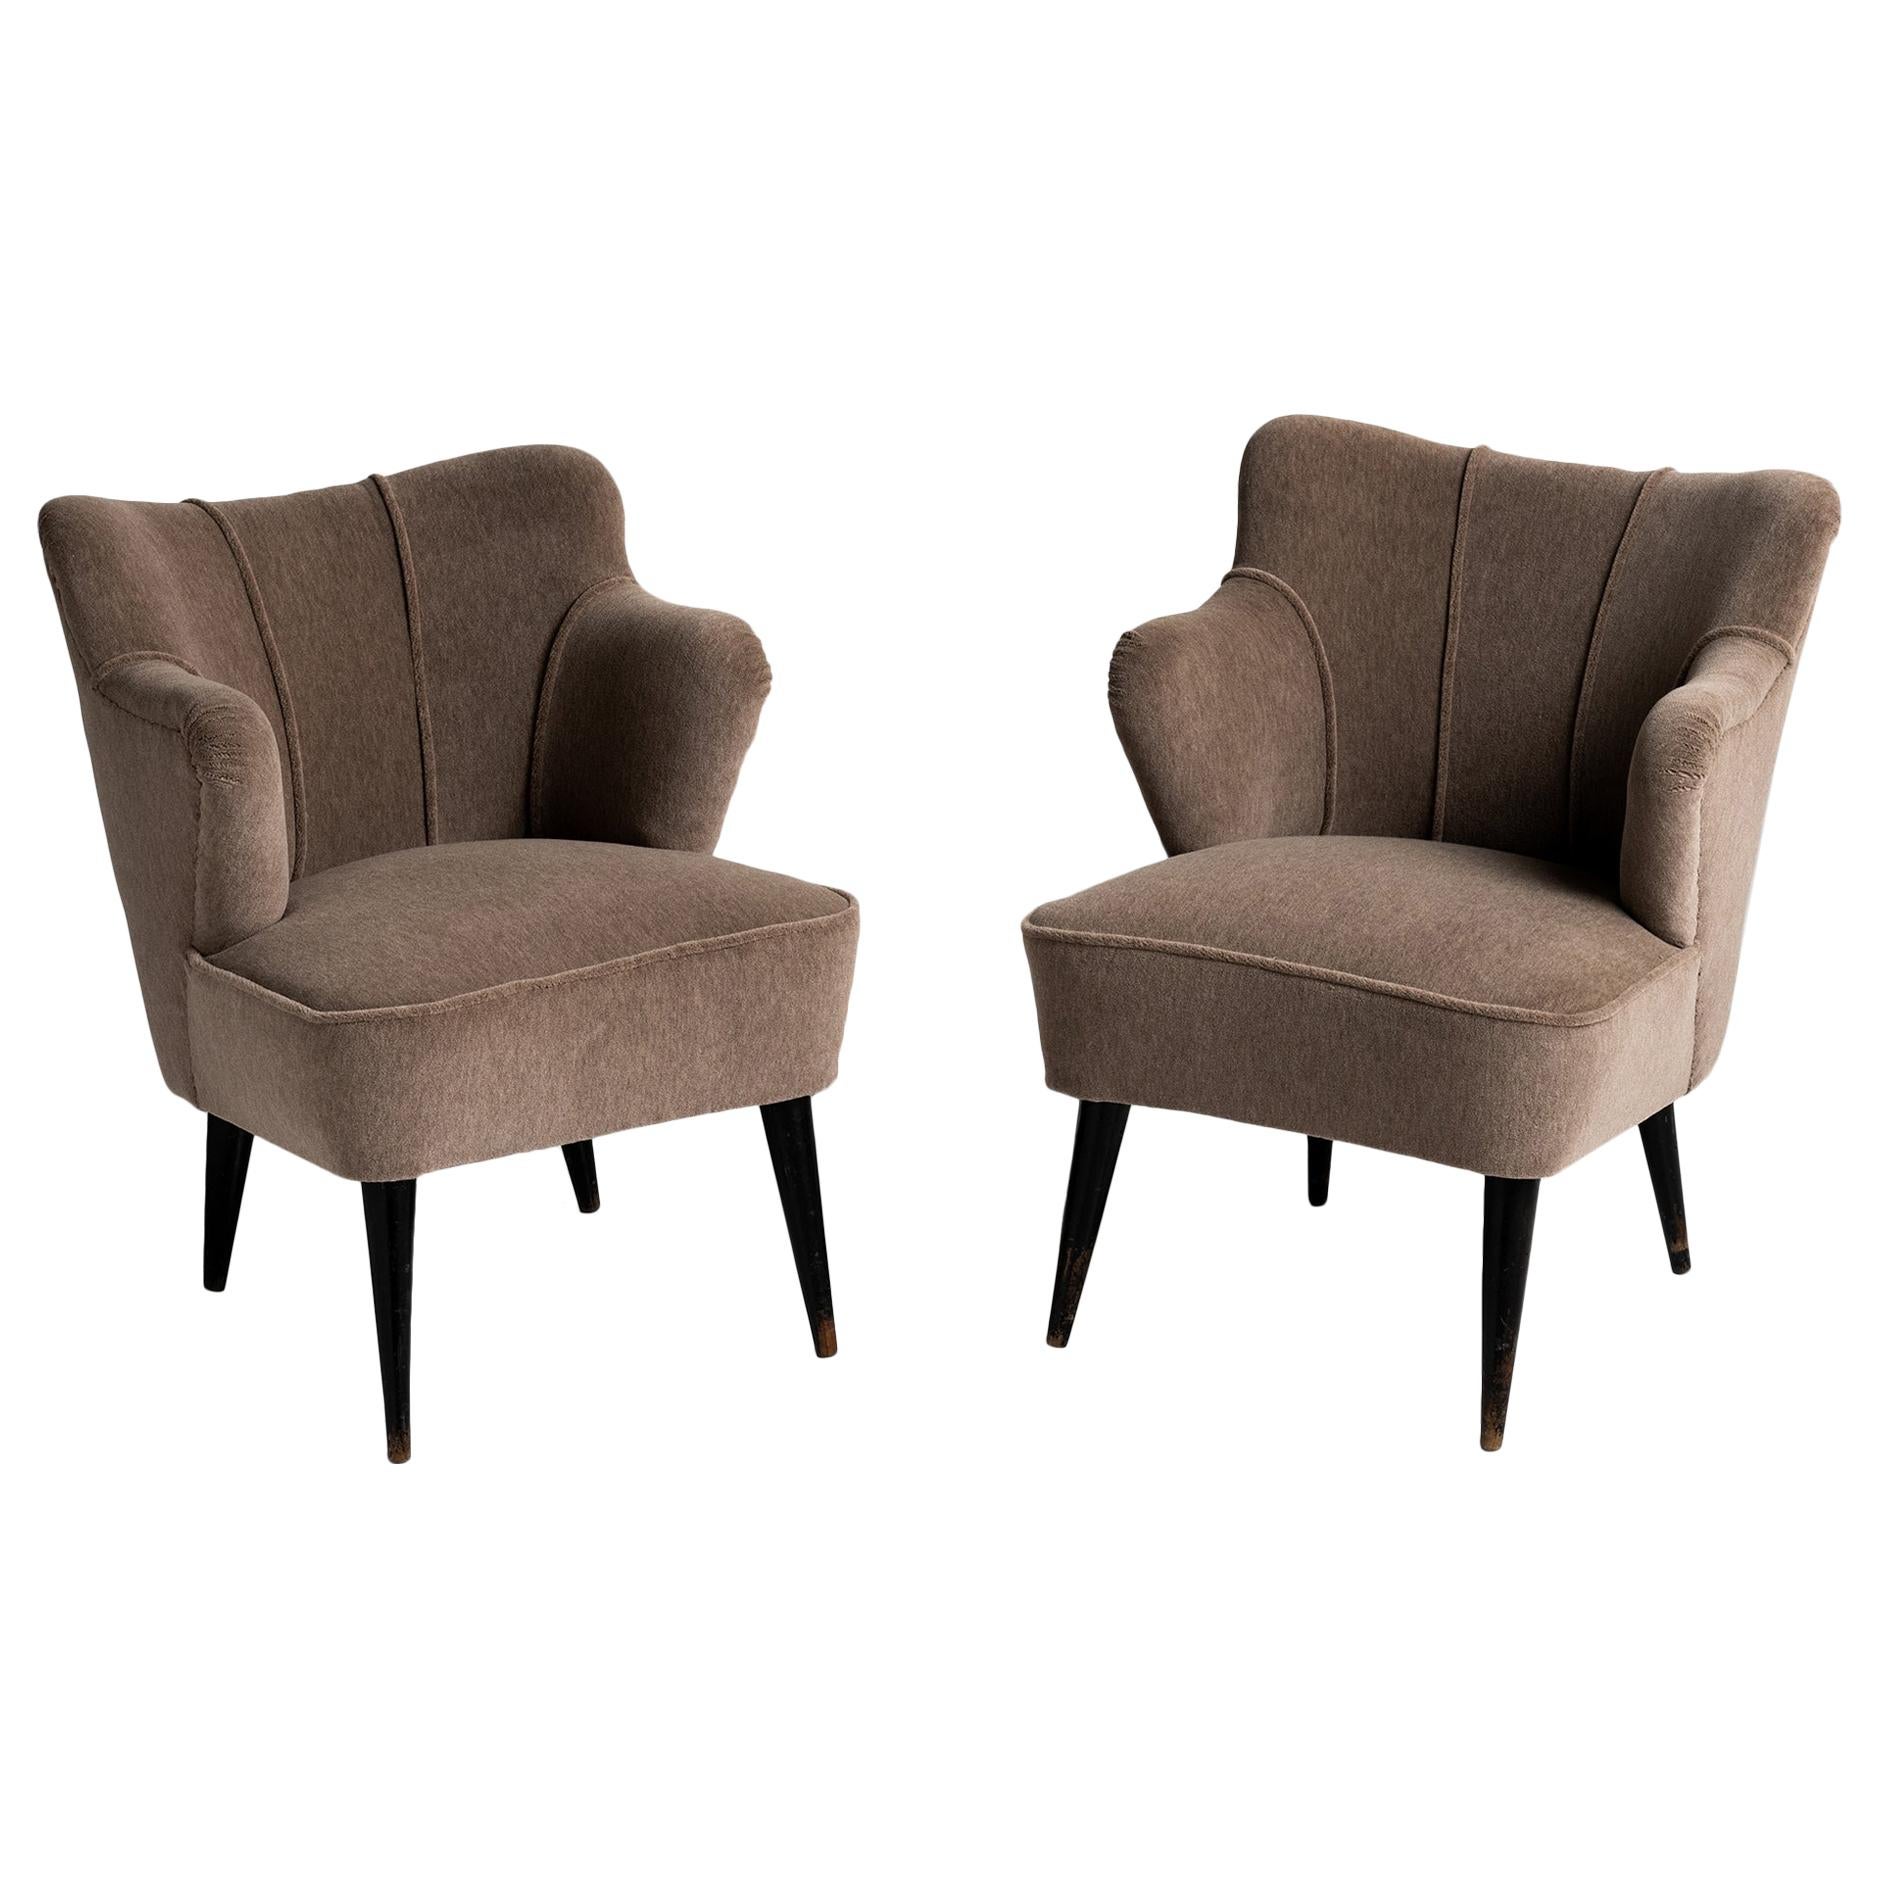 Pair of Armchairs by G. Pulitzer Finali